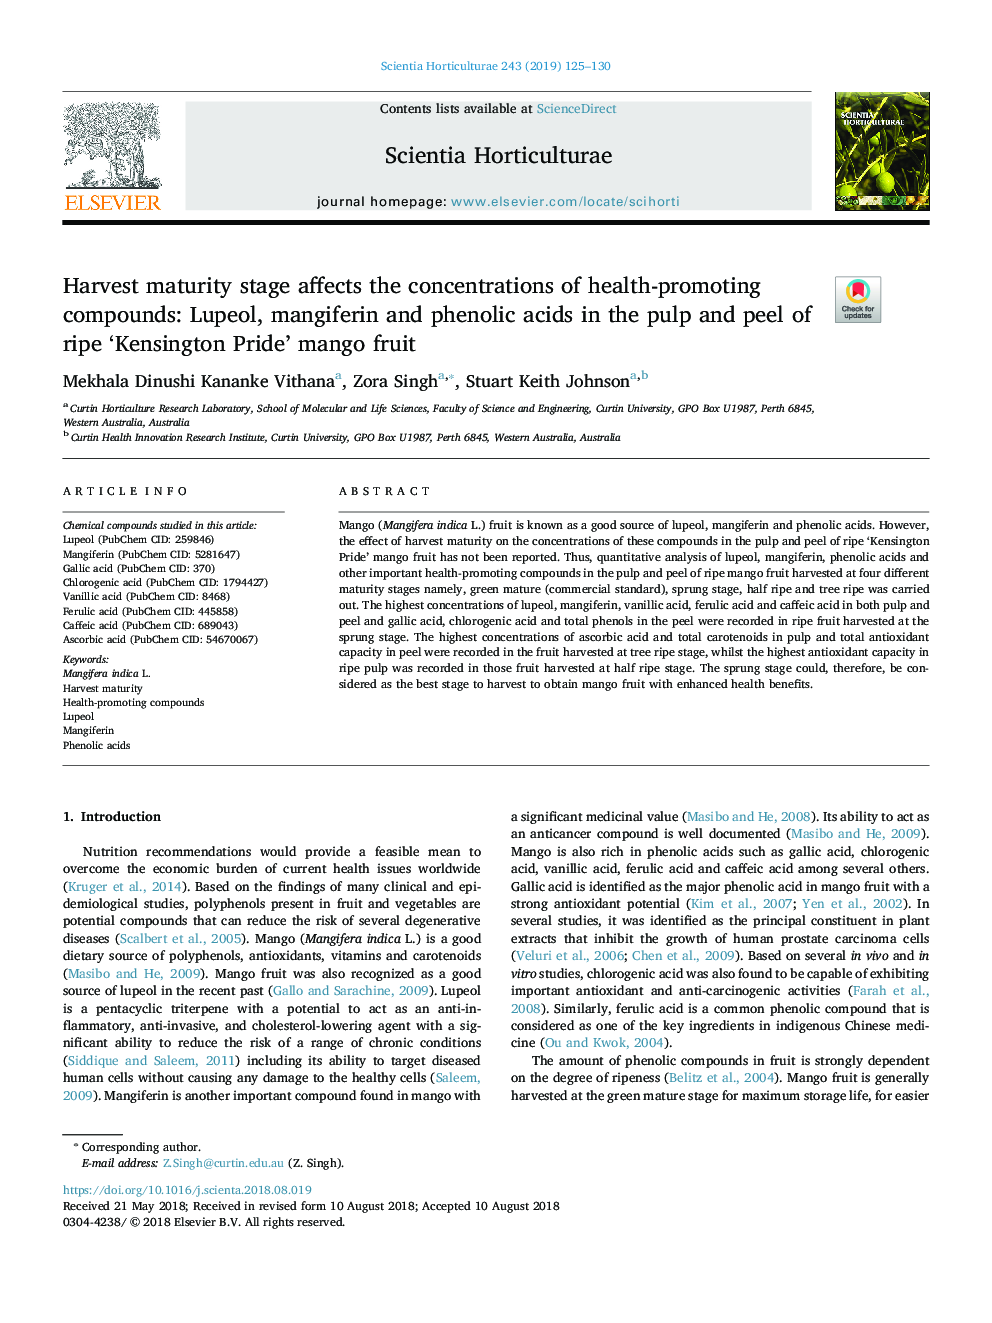 Harvest maturity stage affects the concentrations of health-promoting compounds: Lupeol, mangiferin and phenolic acids in the pulp and peel of ripe 'Kensington Pride' mango fruit